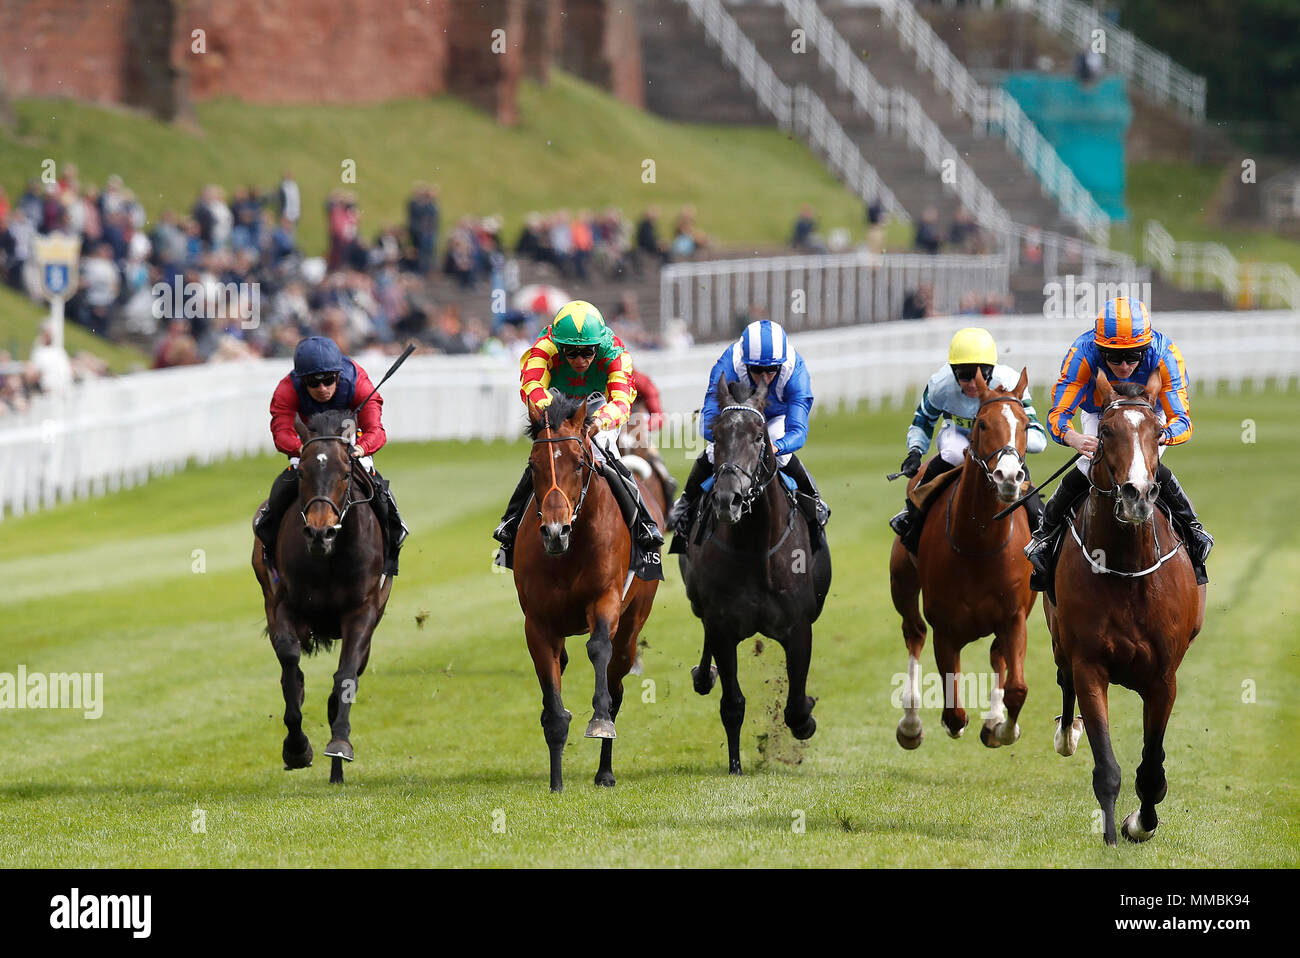 Idaho (right) riden by Ryan Moore on its way to winning The Boodles Diamond Ormonde Stakes, during Ladies Day of the 2018 Boodles May Festival at Chester Racecourse. Stock Photo